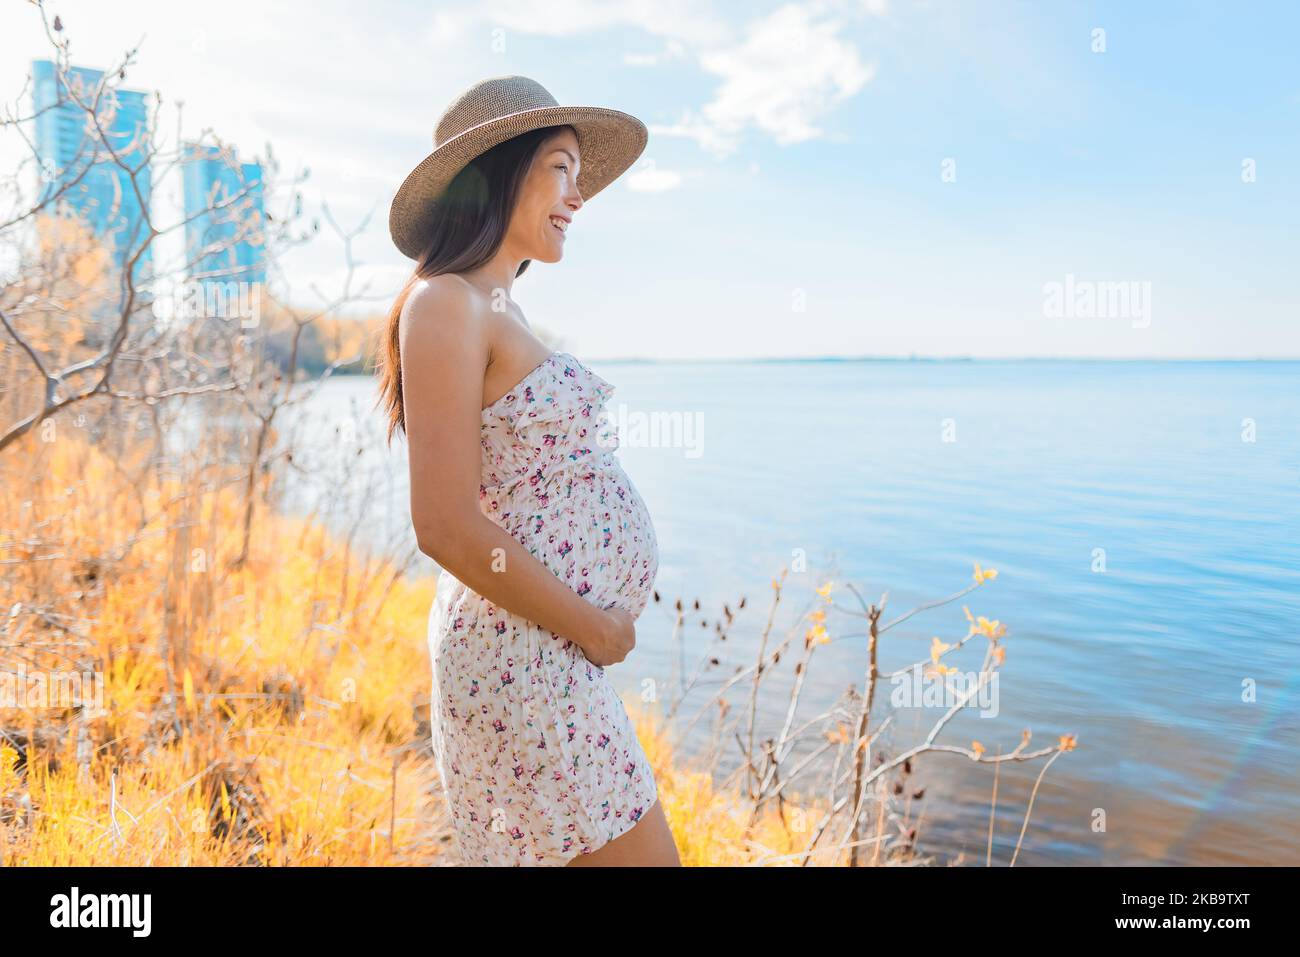 Pregnant Asian woman walking in city park by the lake wearing sun hat during spring nature walk relaxing lookig at landscape. Happy pregnancy outdoor Stock Photo